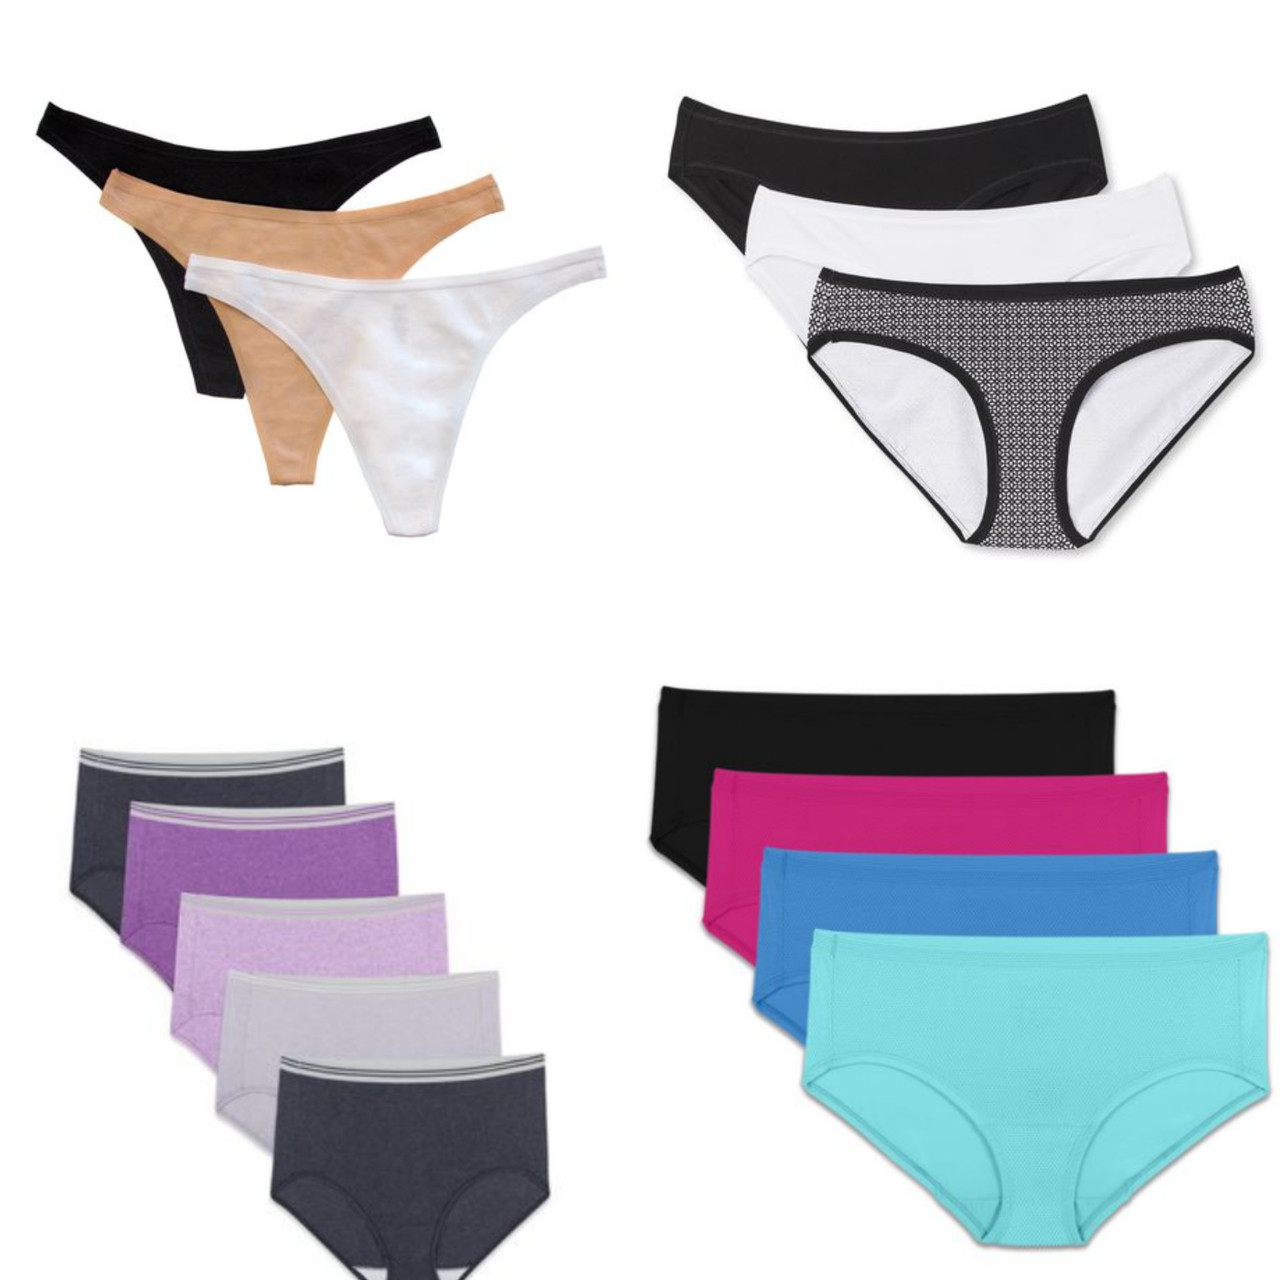 Women's Plus Fit for Me Assorted Heather Brief Underwear, 5 Pack; Sizes 9-13